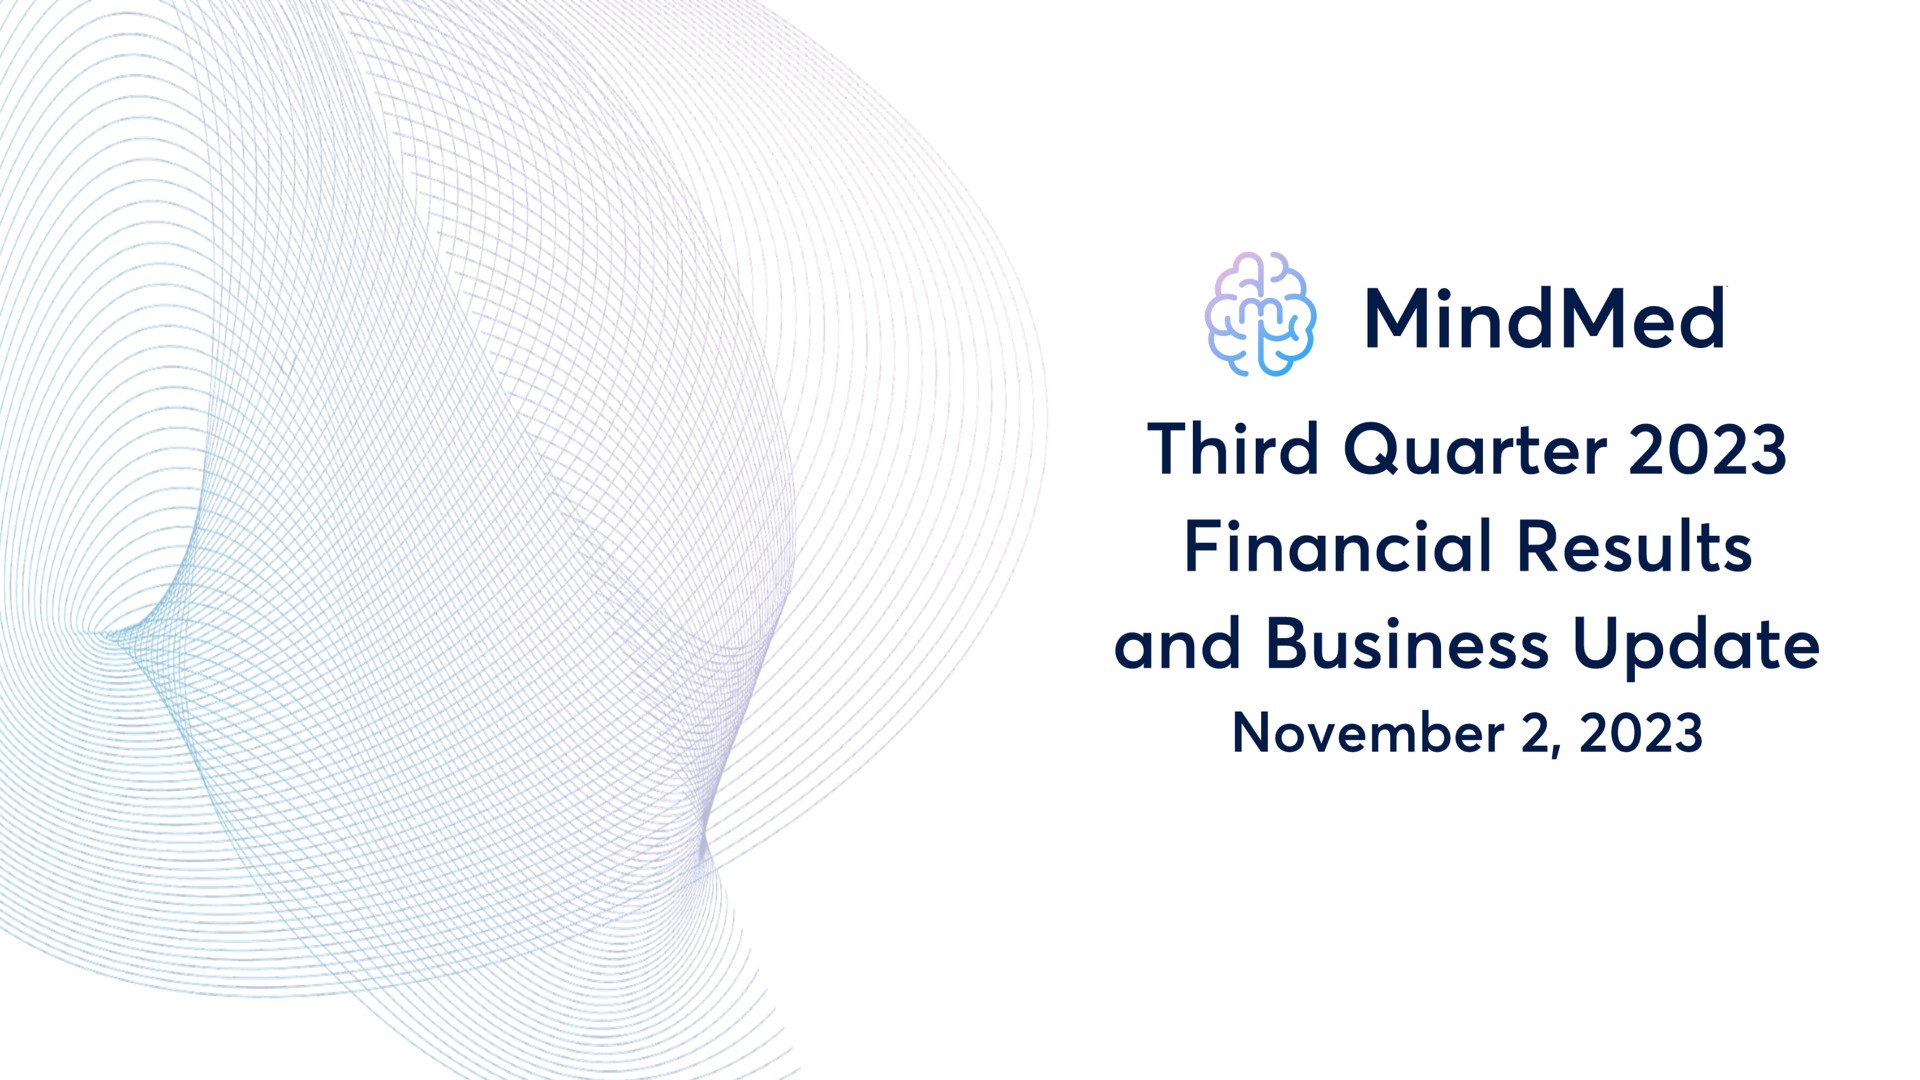 third quarter financial results and business update | MindMed